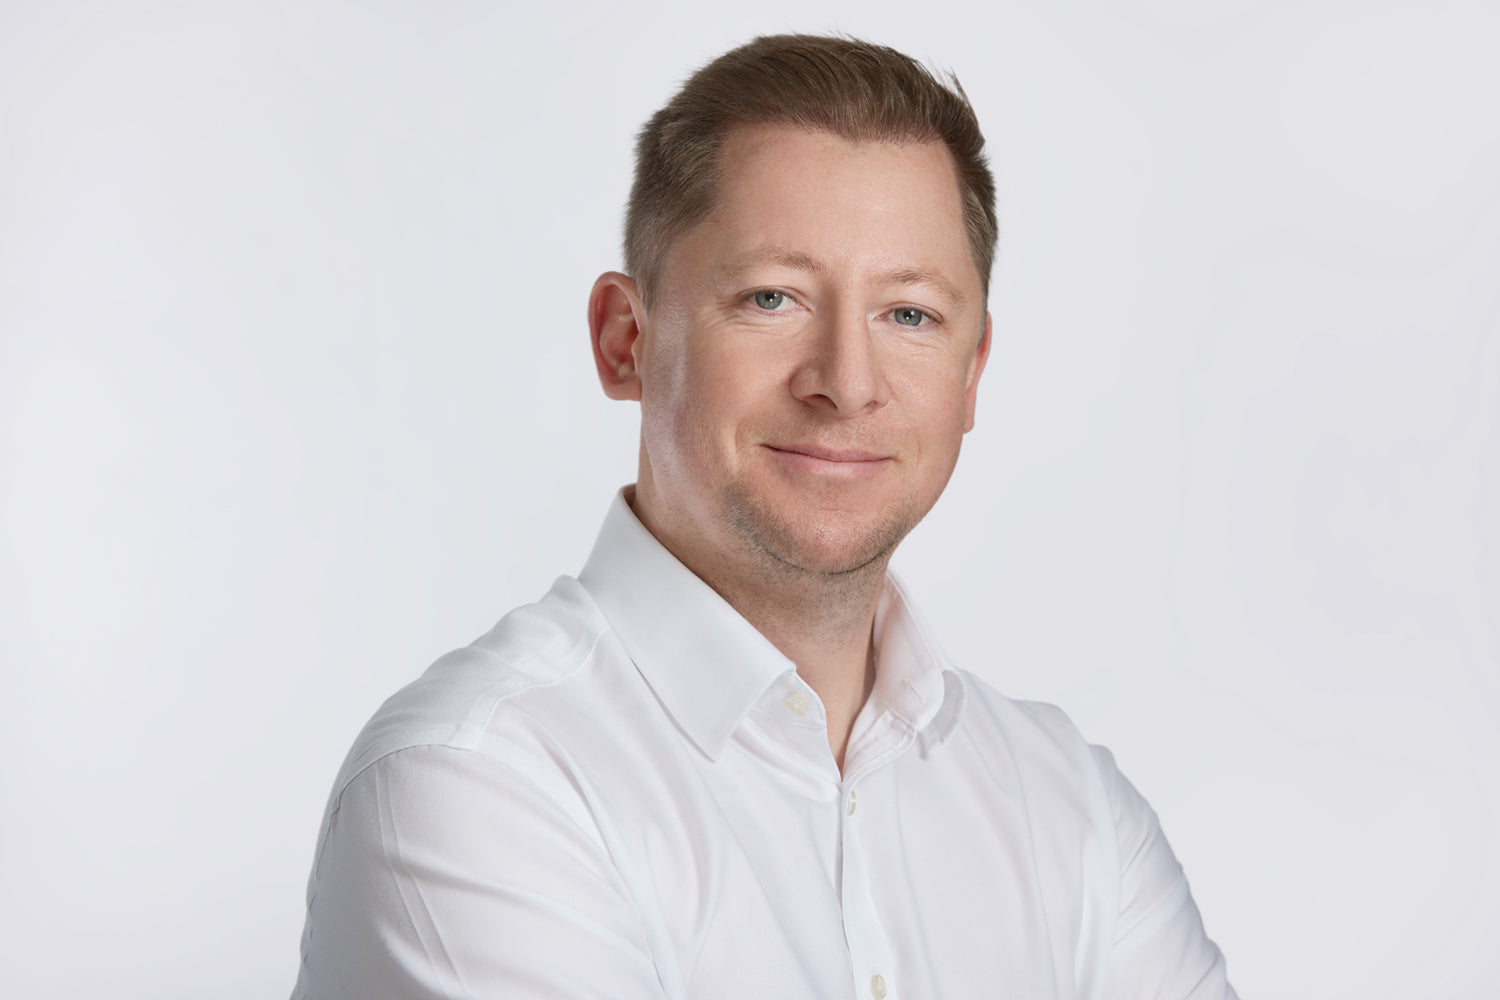 Andy Morton, Marketing Manager